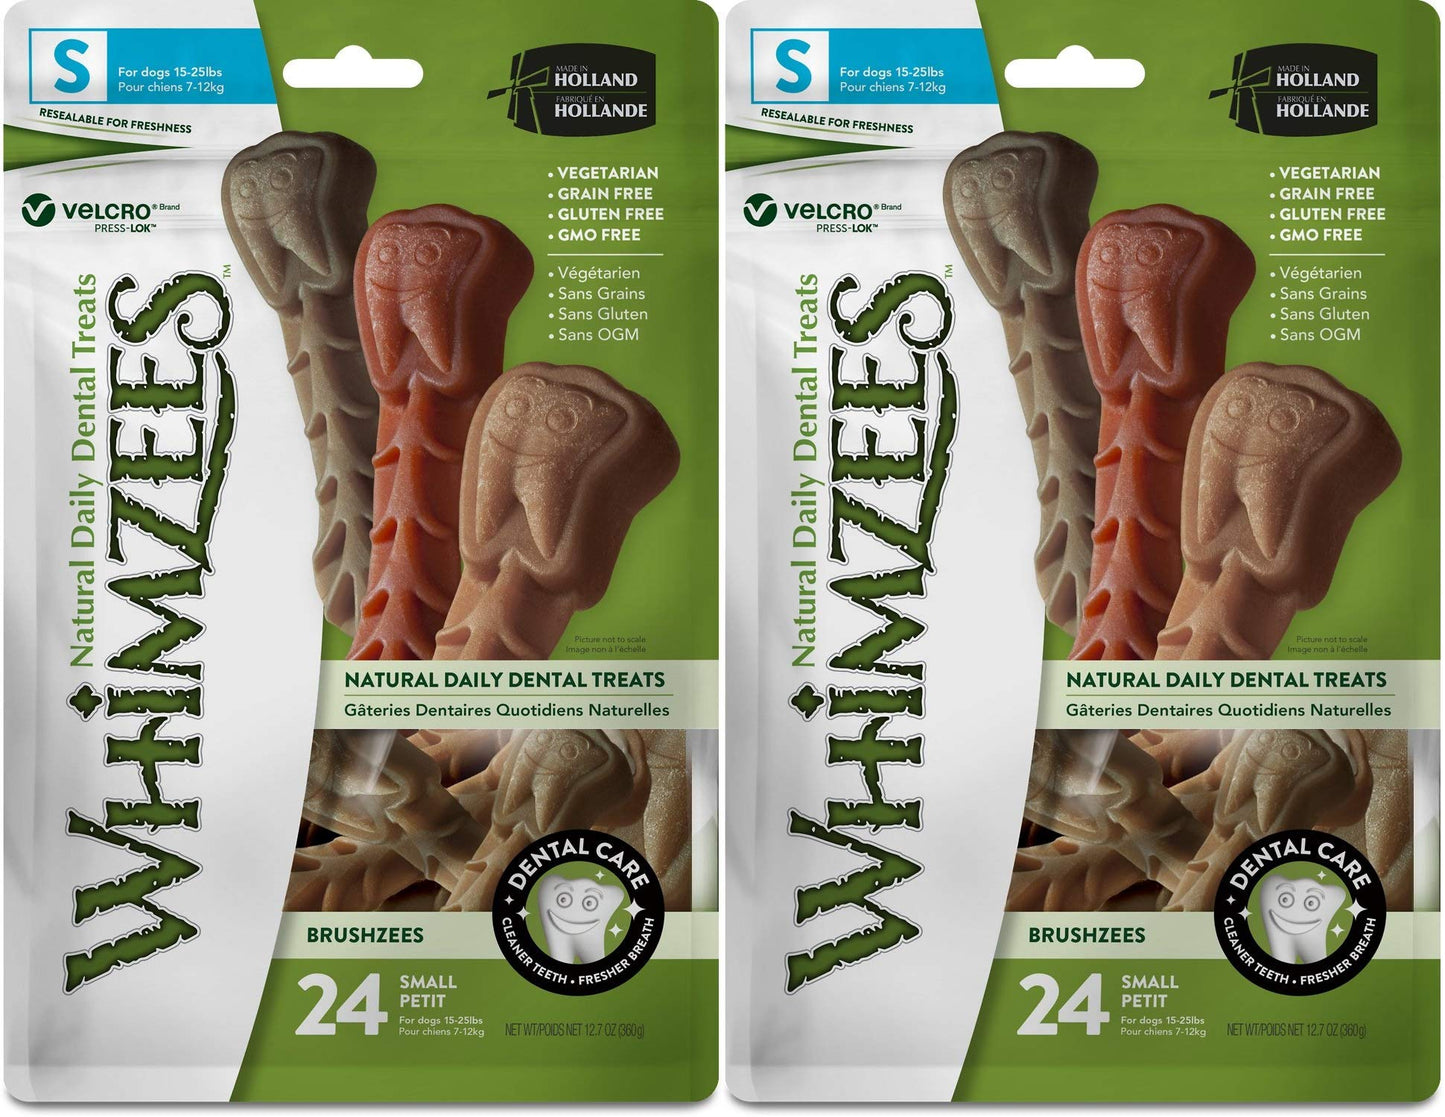 Whimzees (2 Packages) Toothbrush Star Small Value Bag, 24 ct Each2